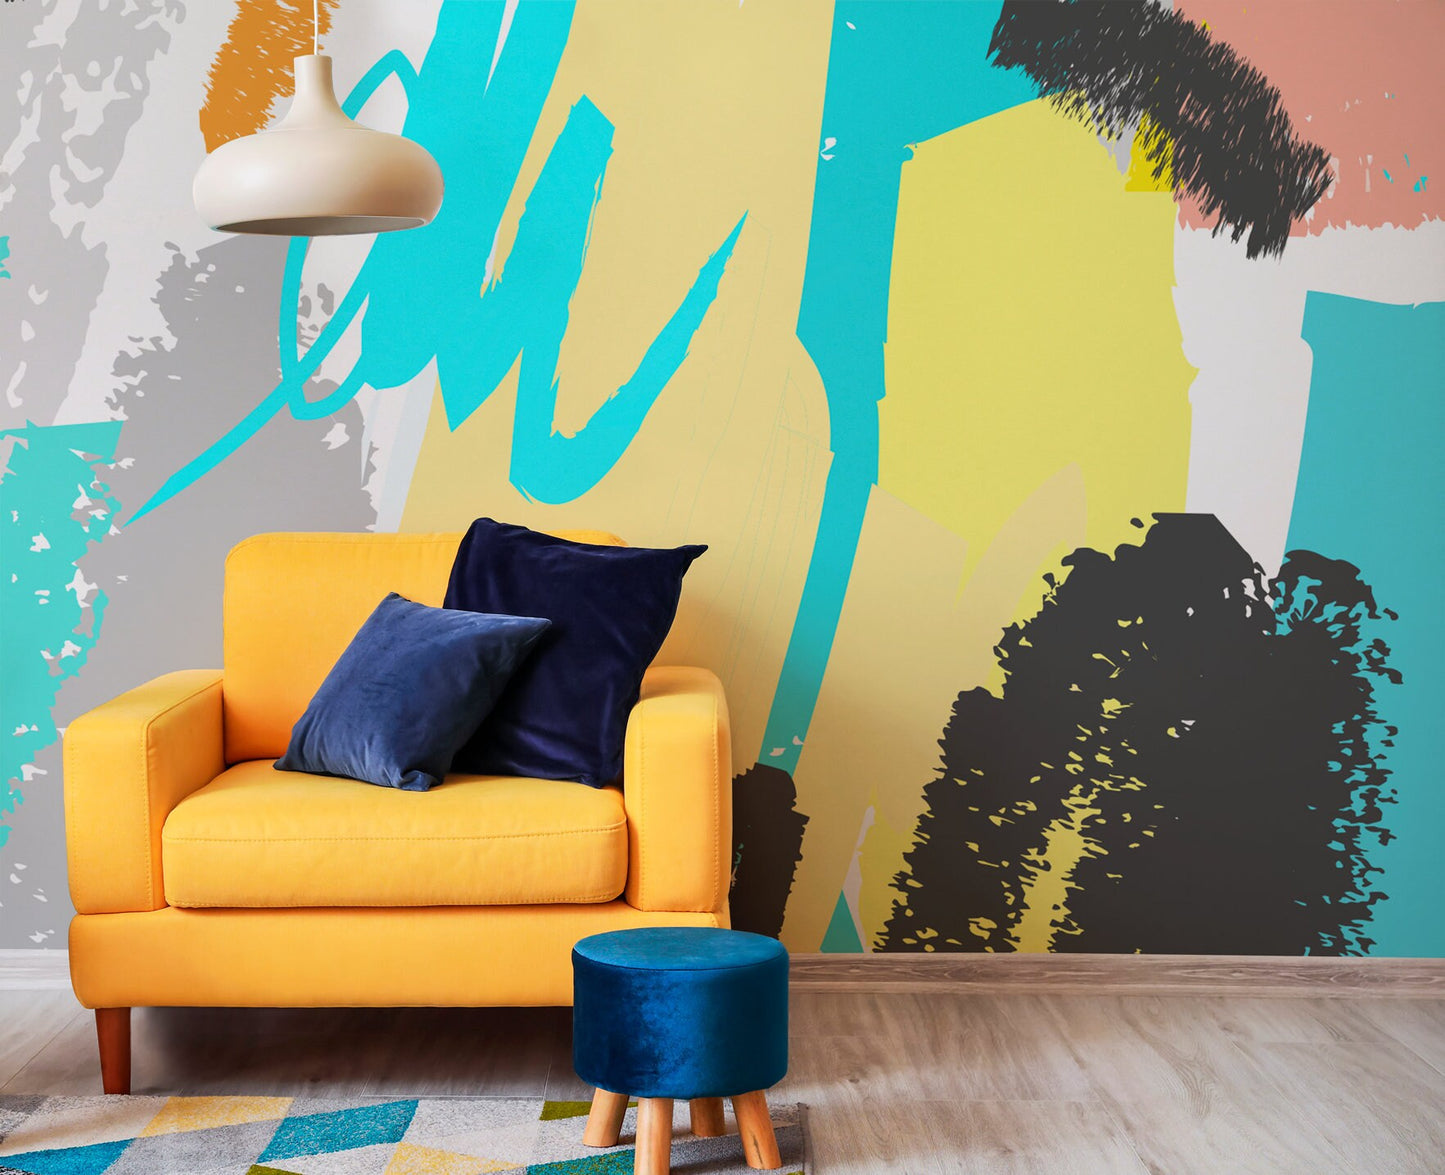 Removable Wallpaper, Temporary Wallpaper, Peel and Stick Wallpaper, Abstract Mural - B166